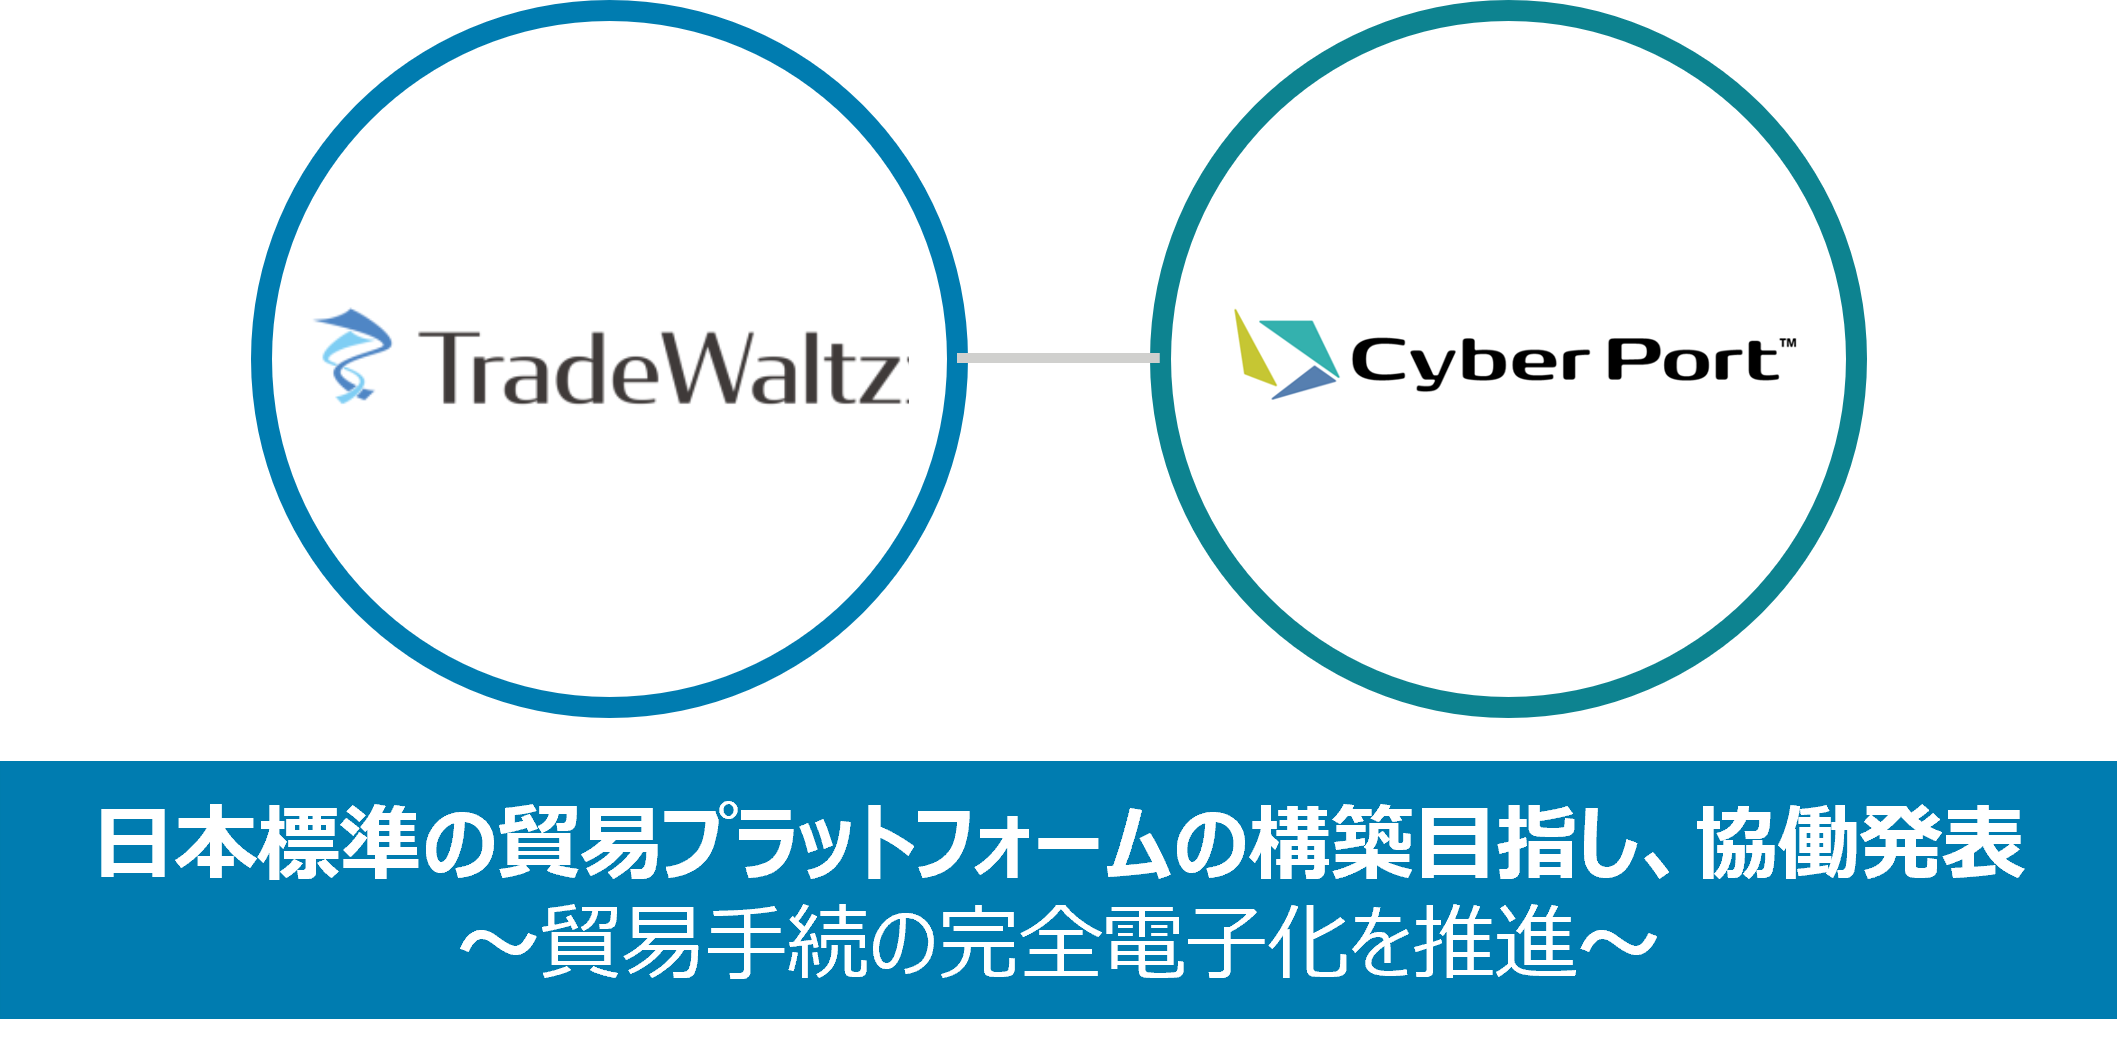 Announced the collaboration of TradeWaltz-Cyber Port with the aim of building a Japanese standard trade platform – to complete full digitalization including the conclusion of transactions with overseas and logistics procedures-